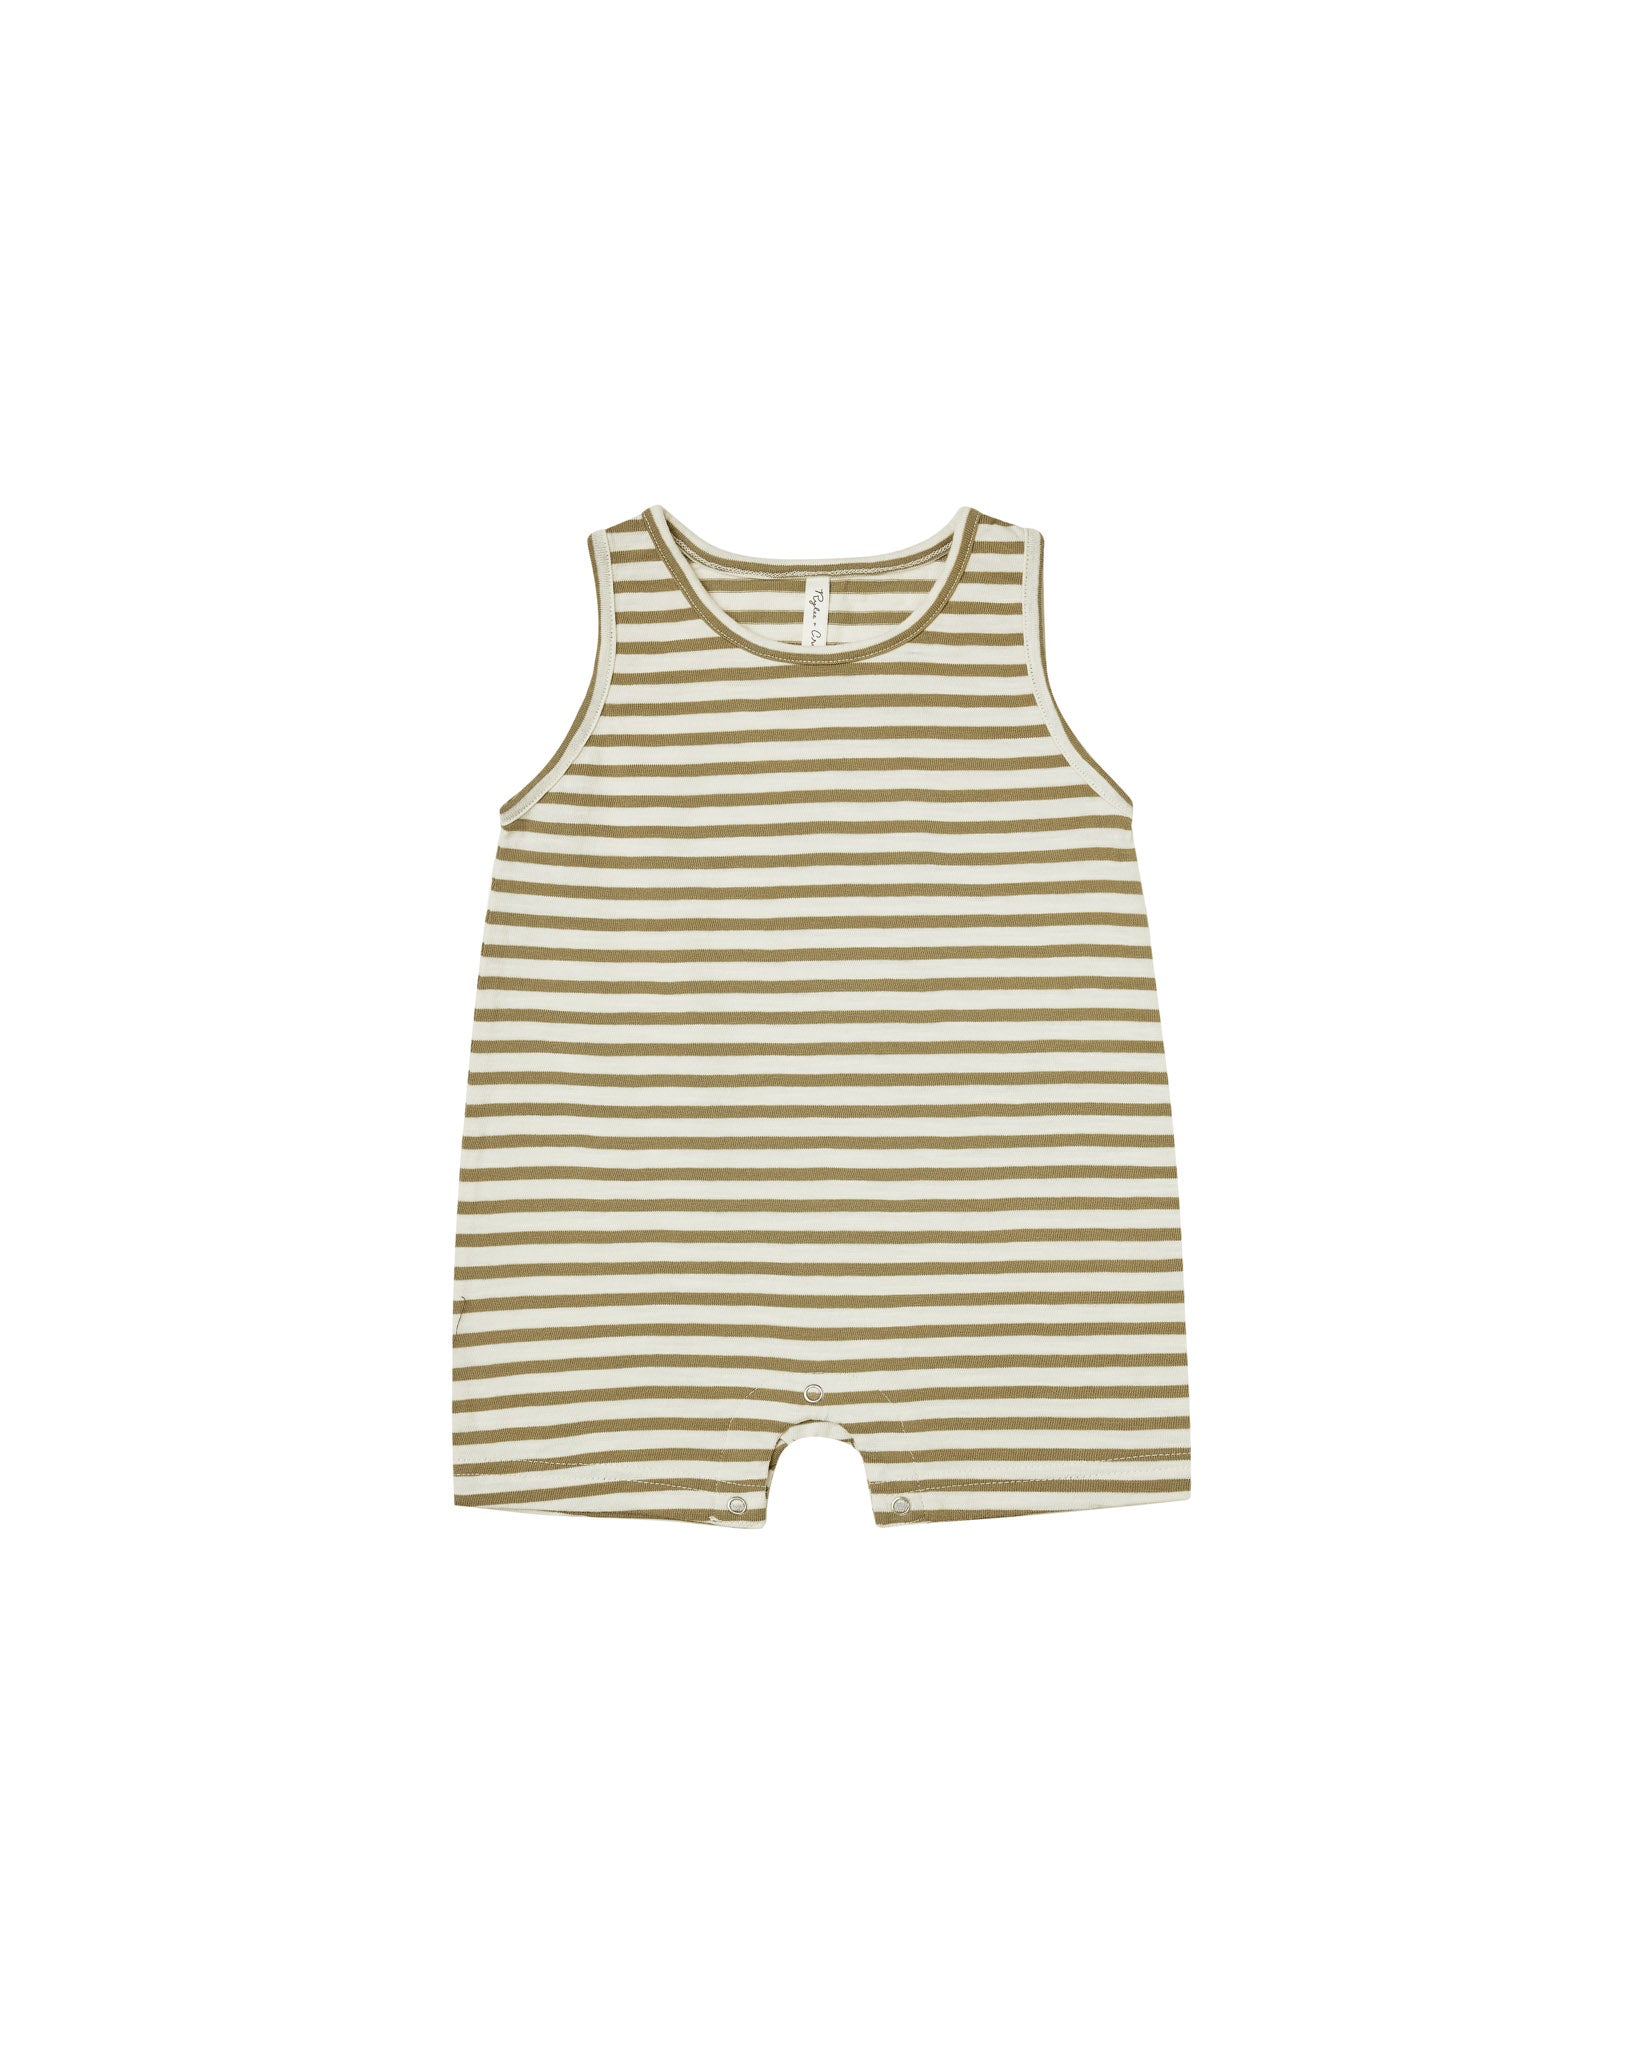 baby sleeveless one piece with Olive Stripe print